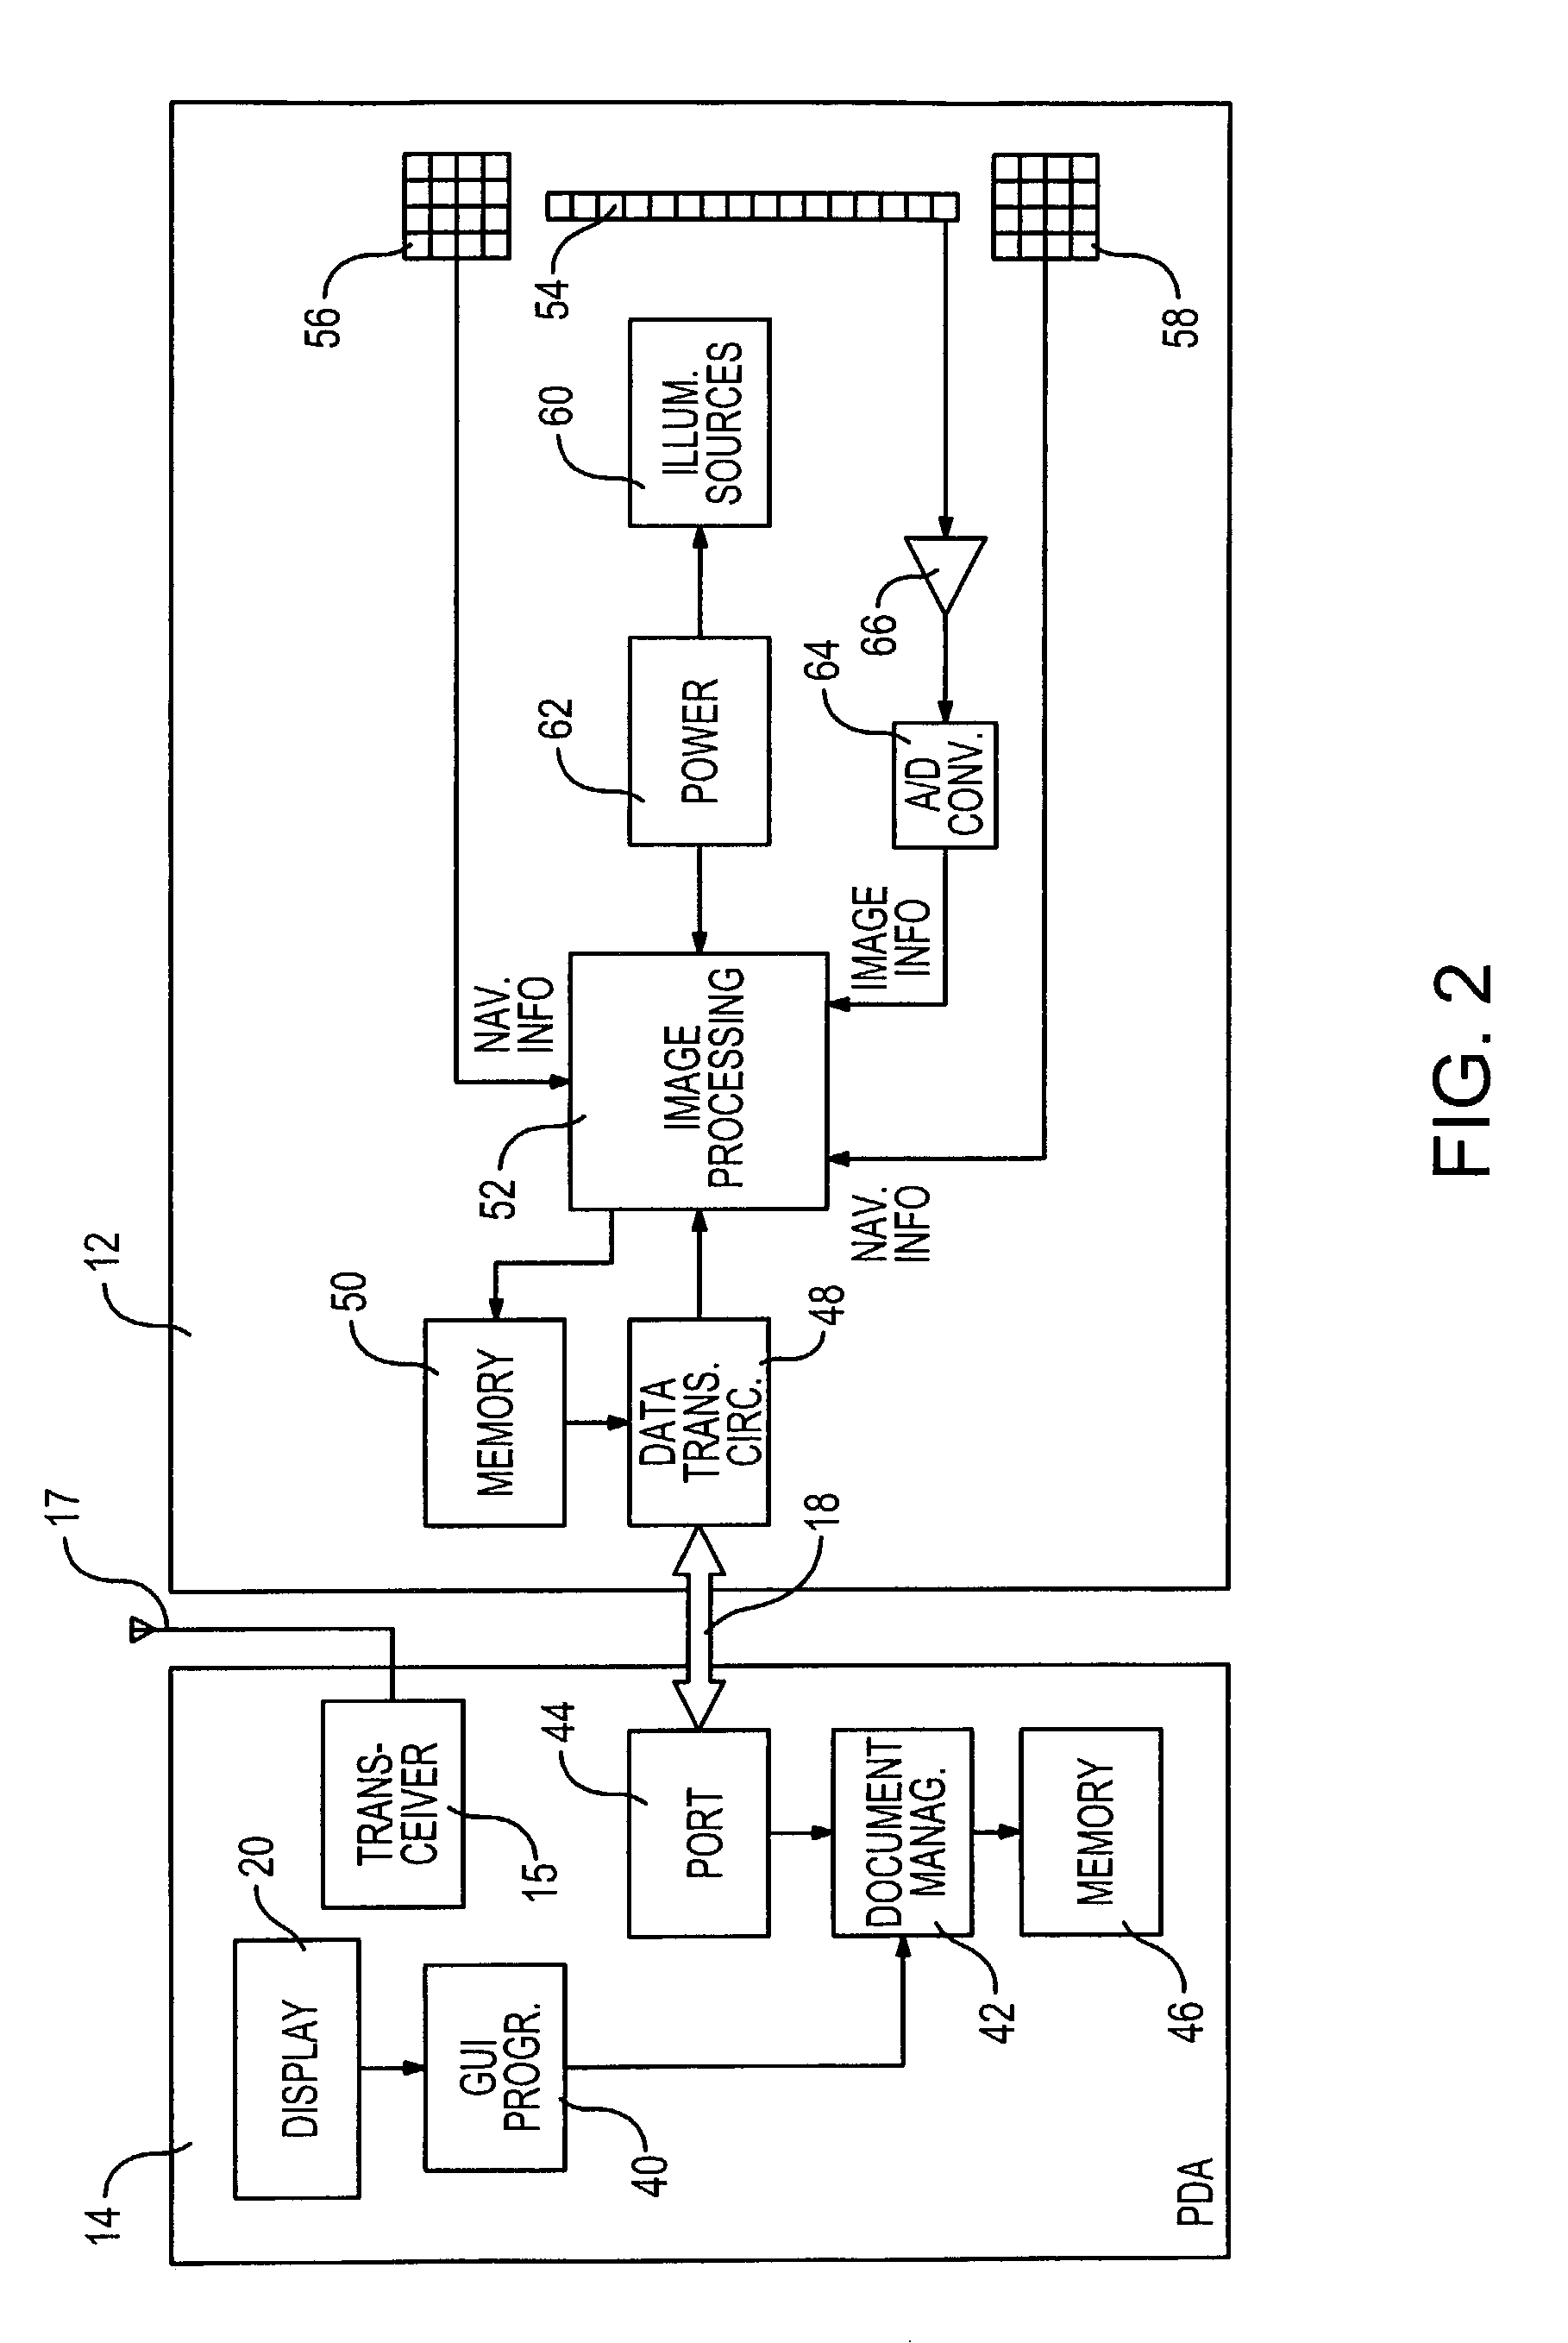 Portable document scan accessory for use with a wireless handheld communications device